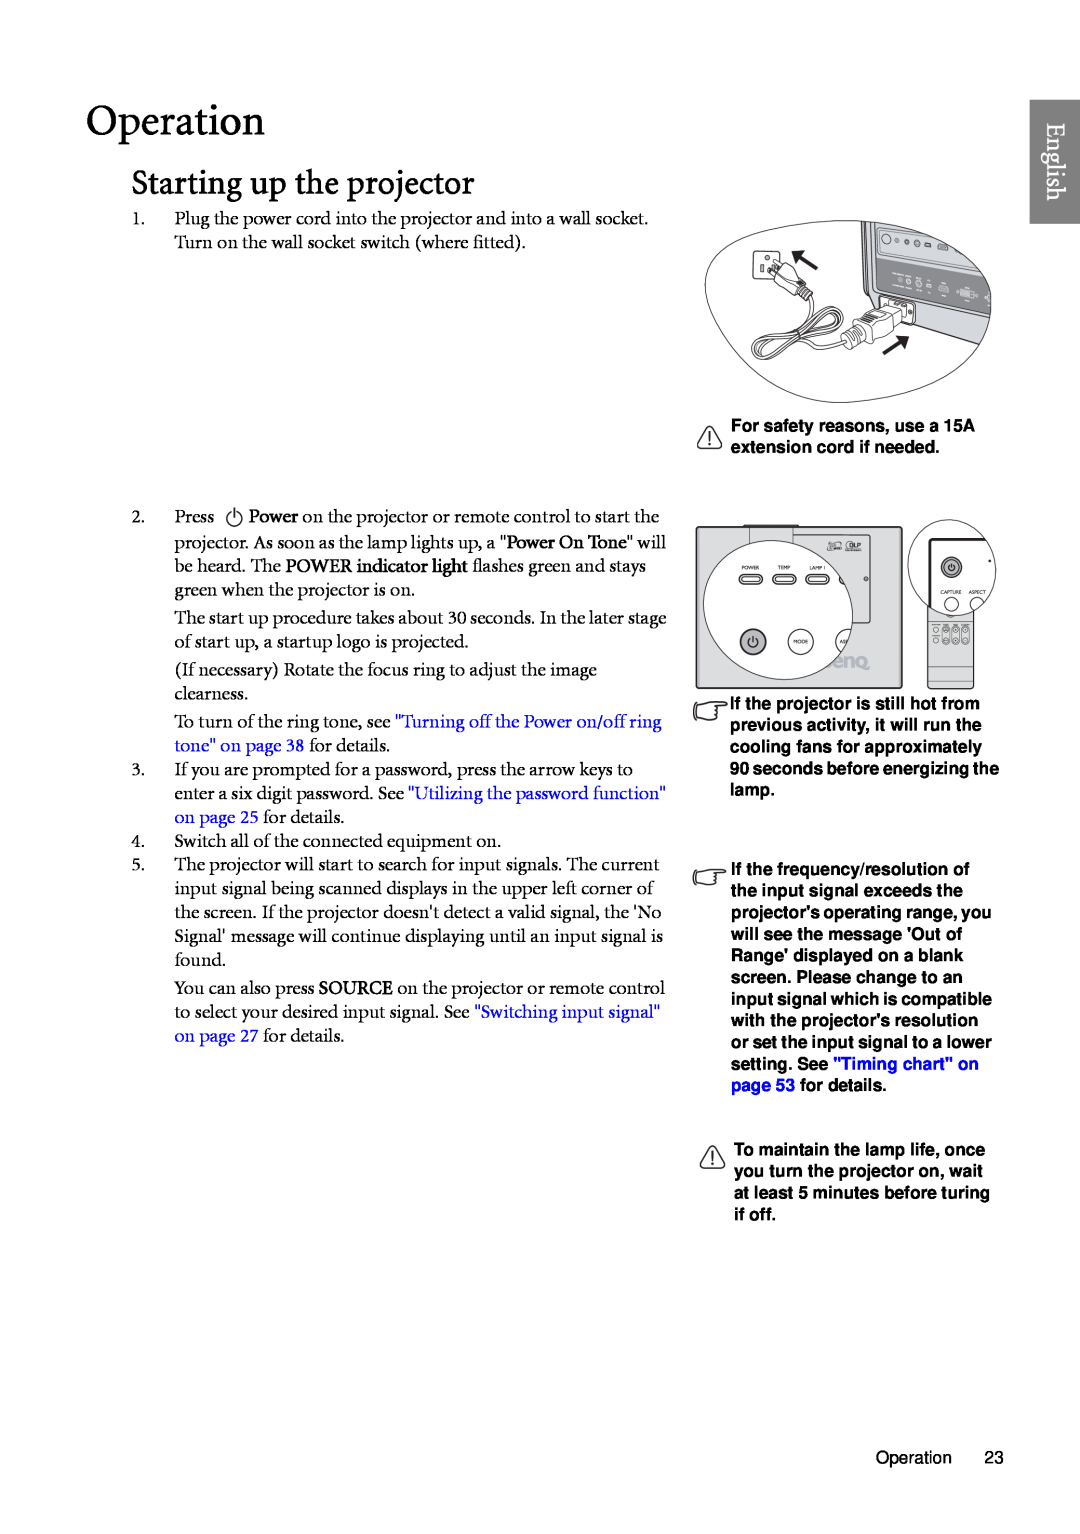 BenQ SP920 user manual Operation, Starting up the projector, English 